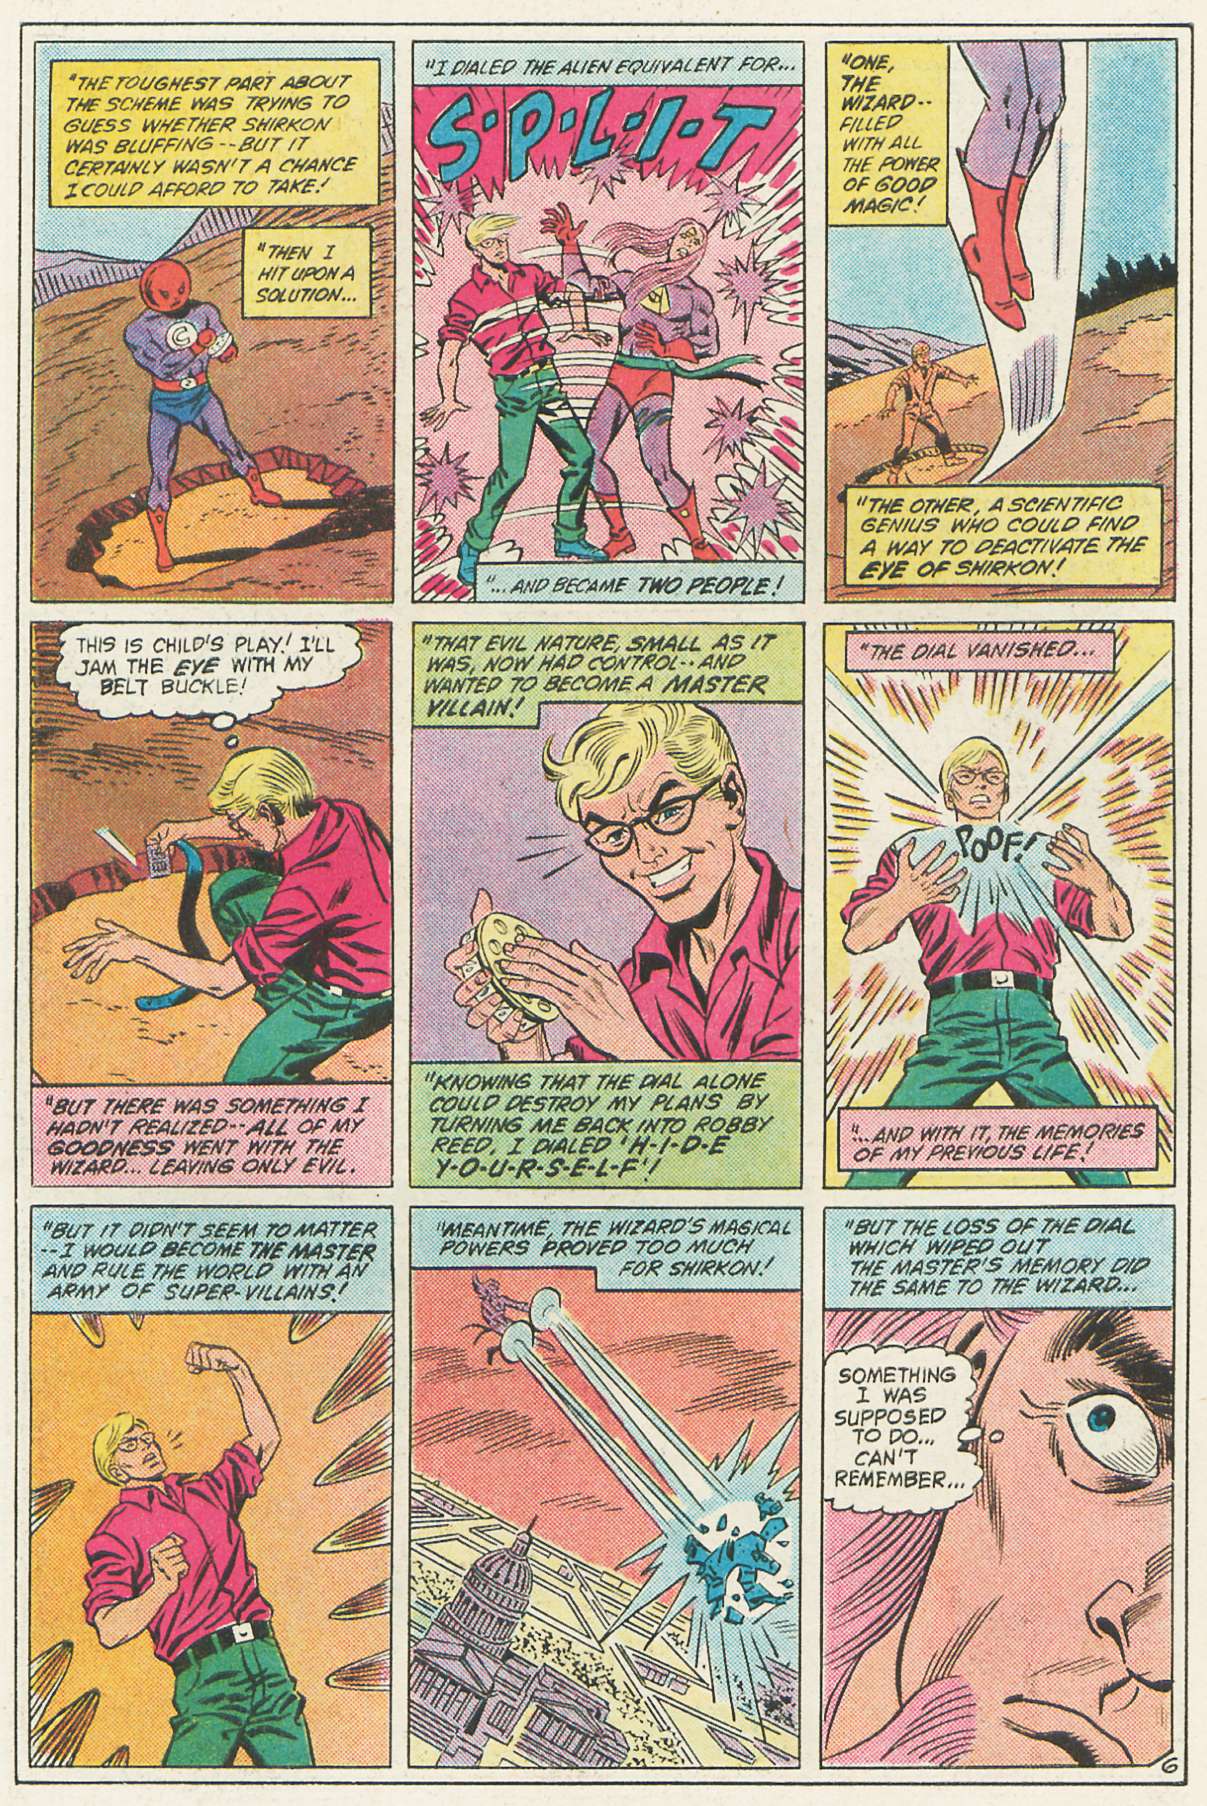 The New Adventures of Superboy 49 Page 22